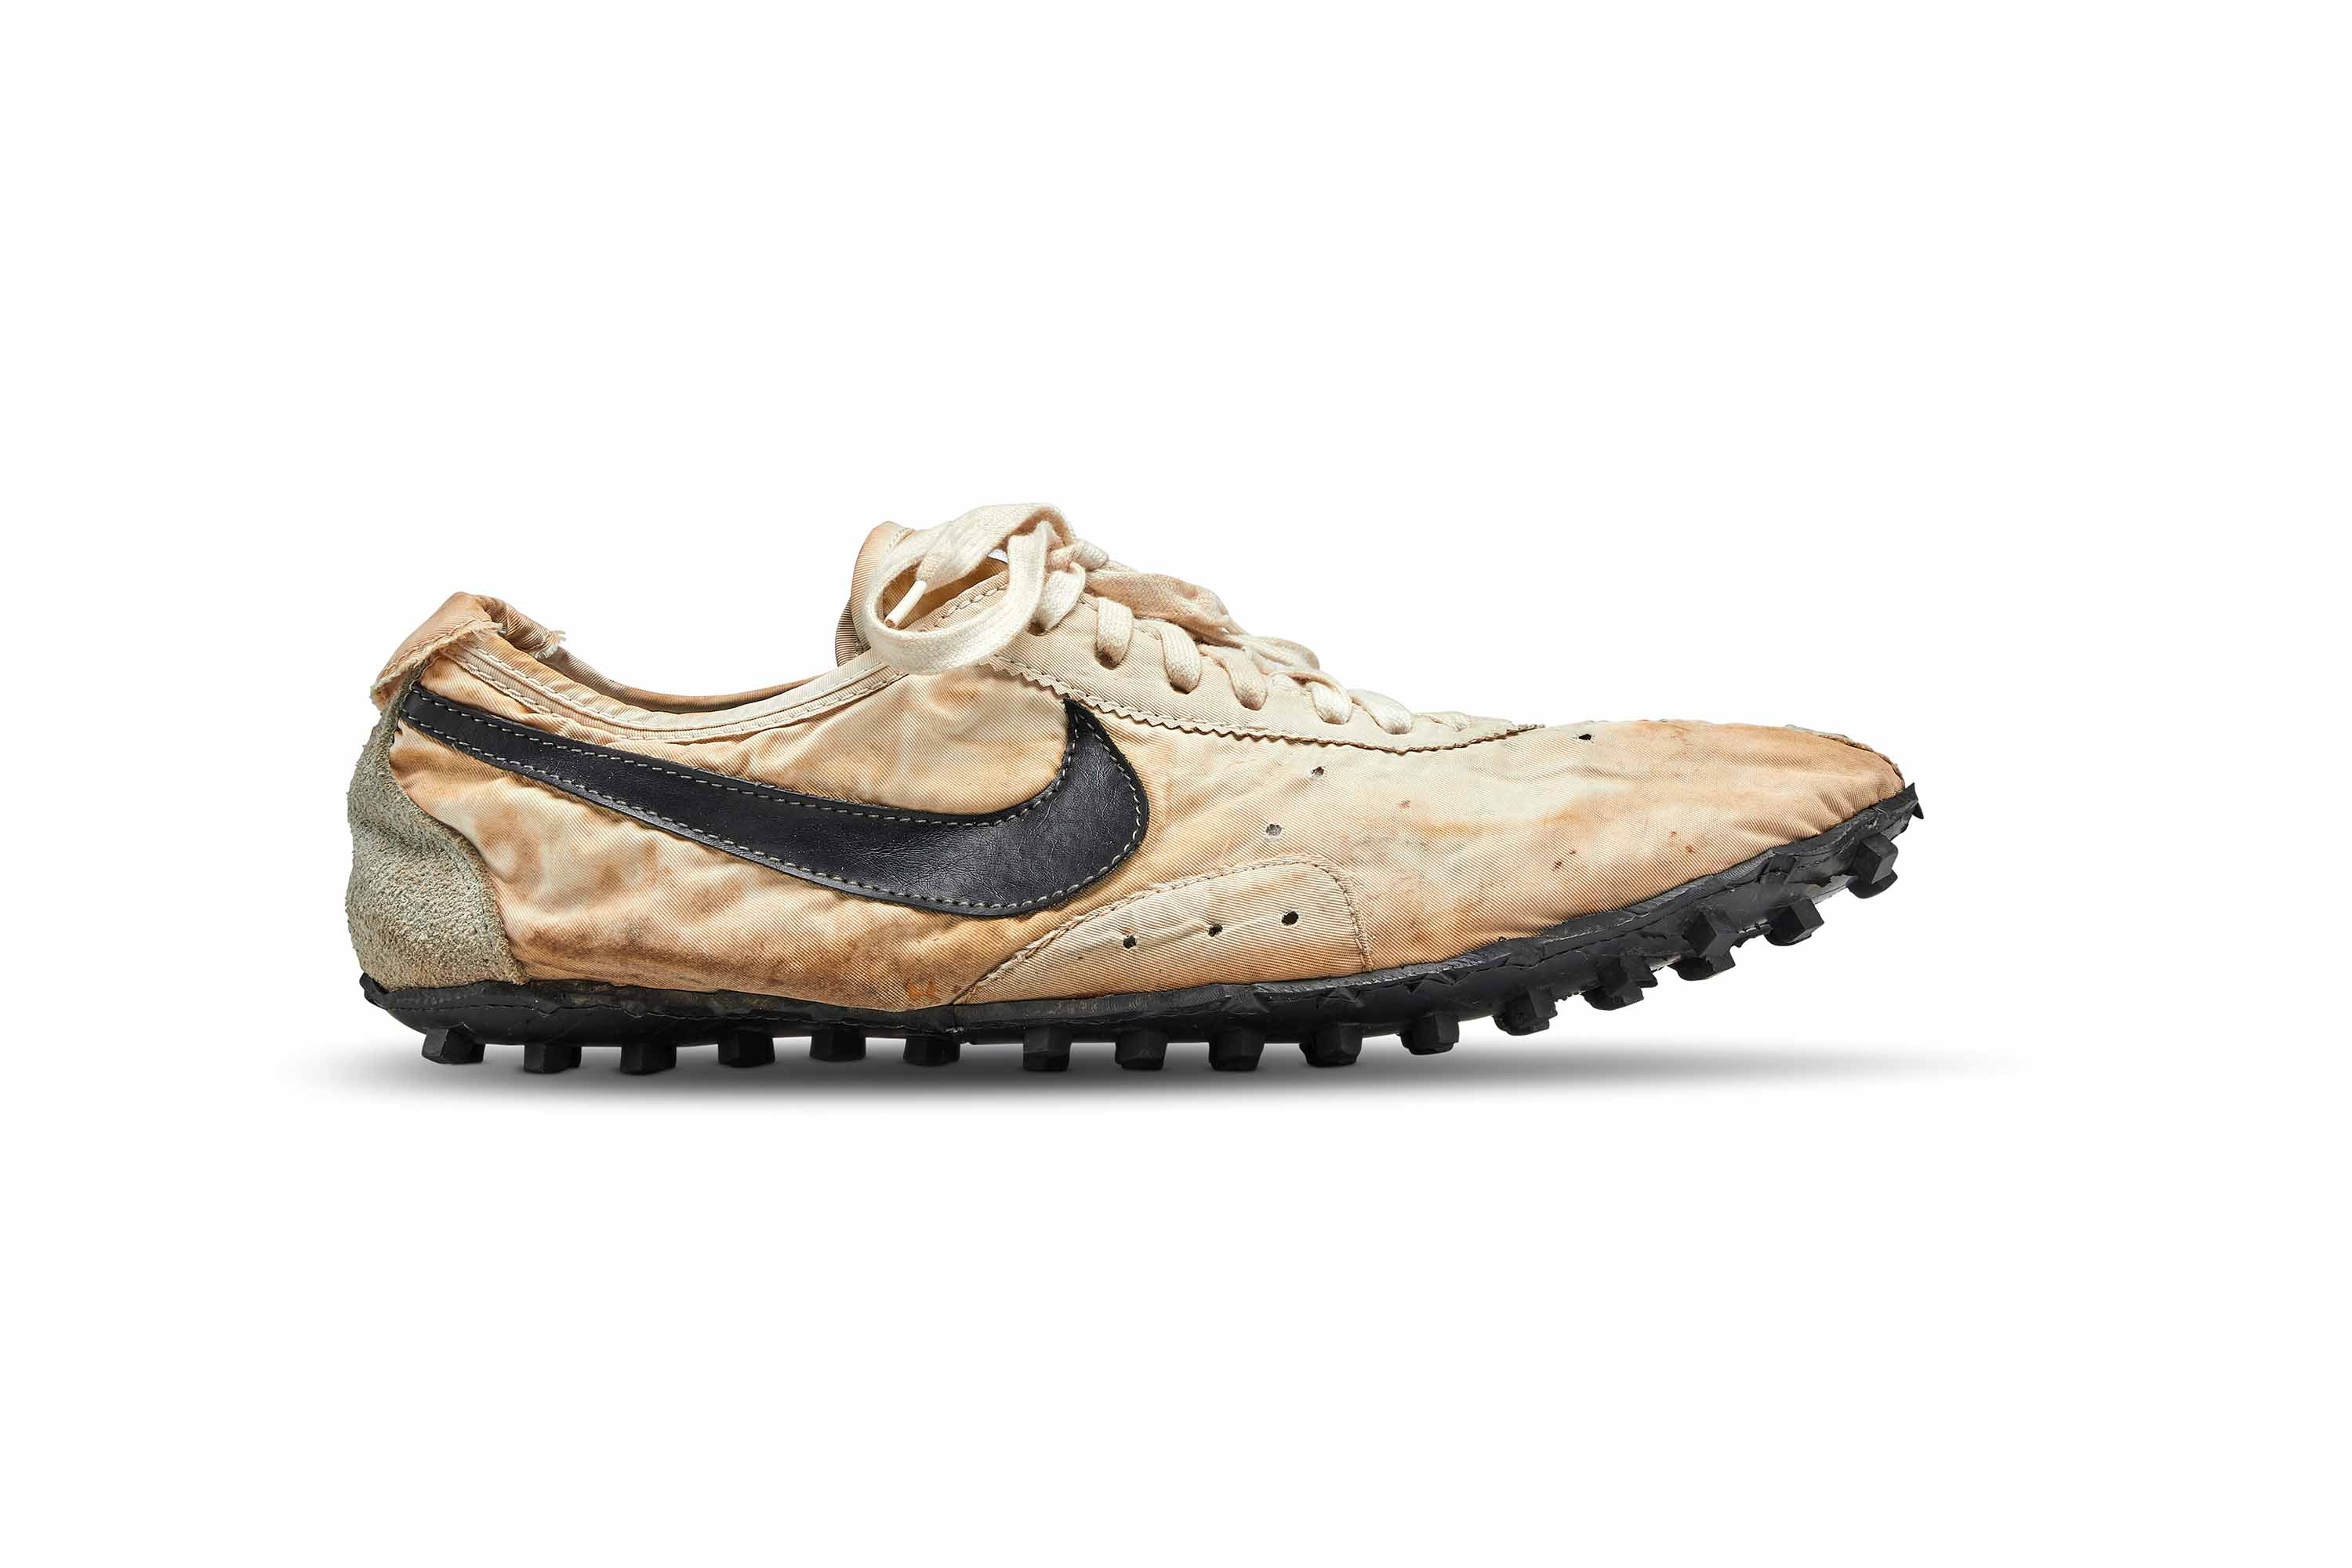 graven Algemeen onthouden Nike's rare 'Moon Shoe' is sold for $437,500, shattering the auction record  for sneakers | CNN